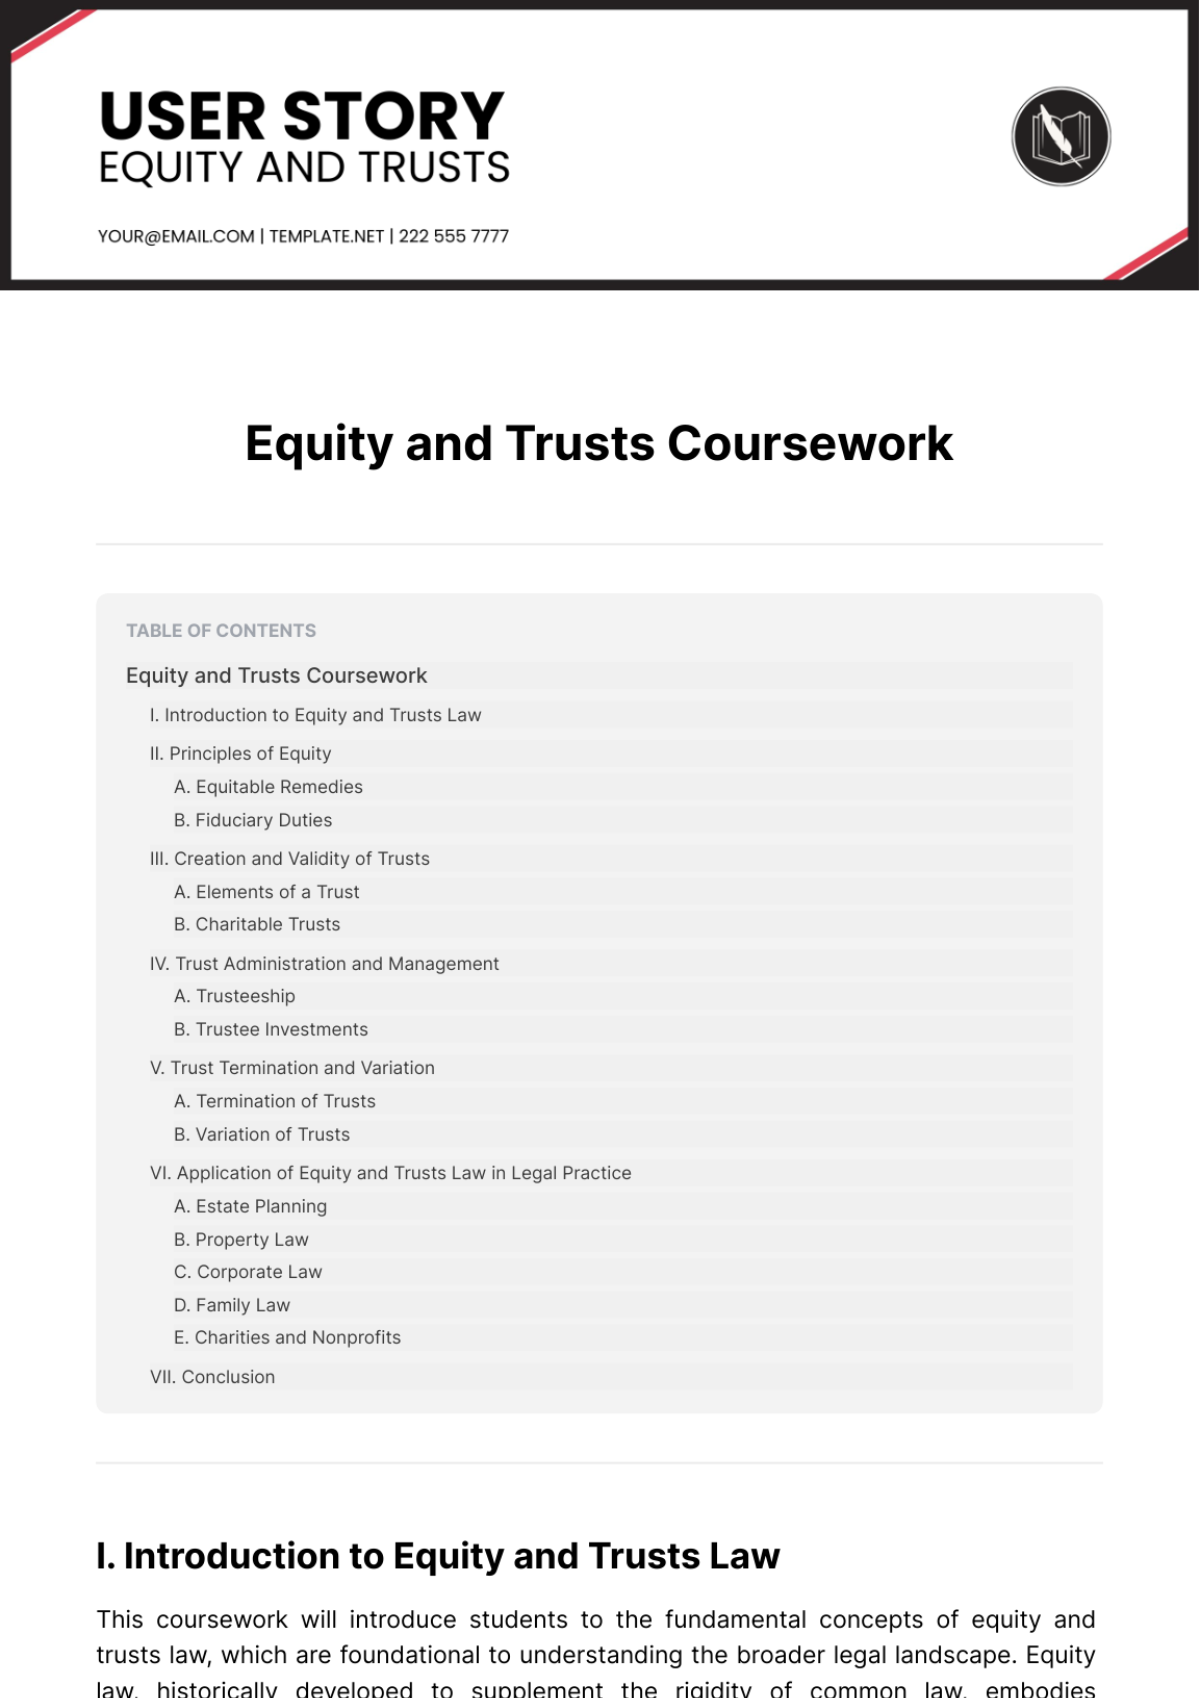 Equity and Trusts Coursework Template